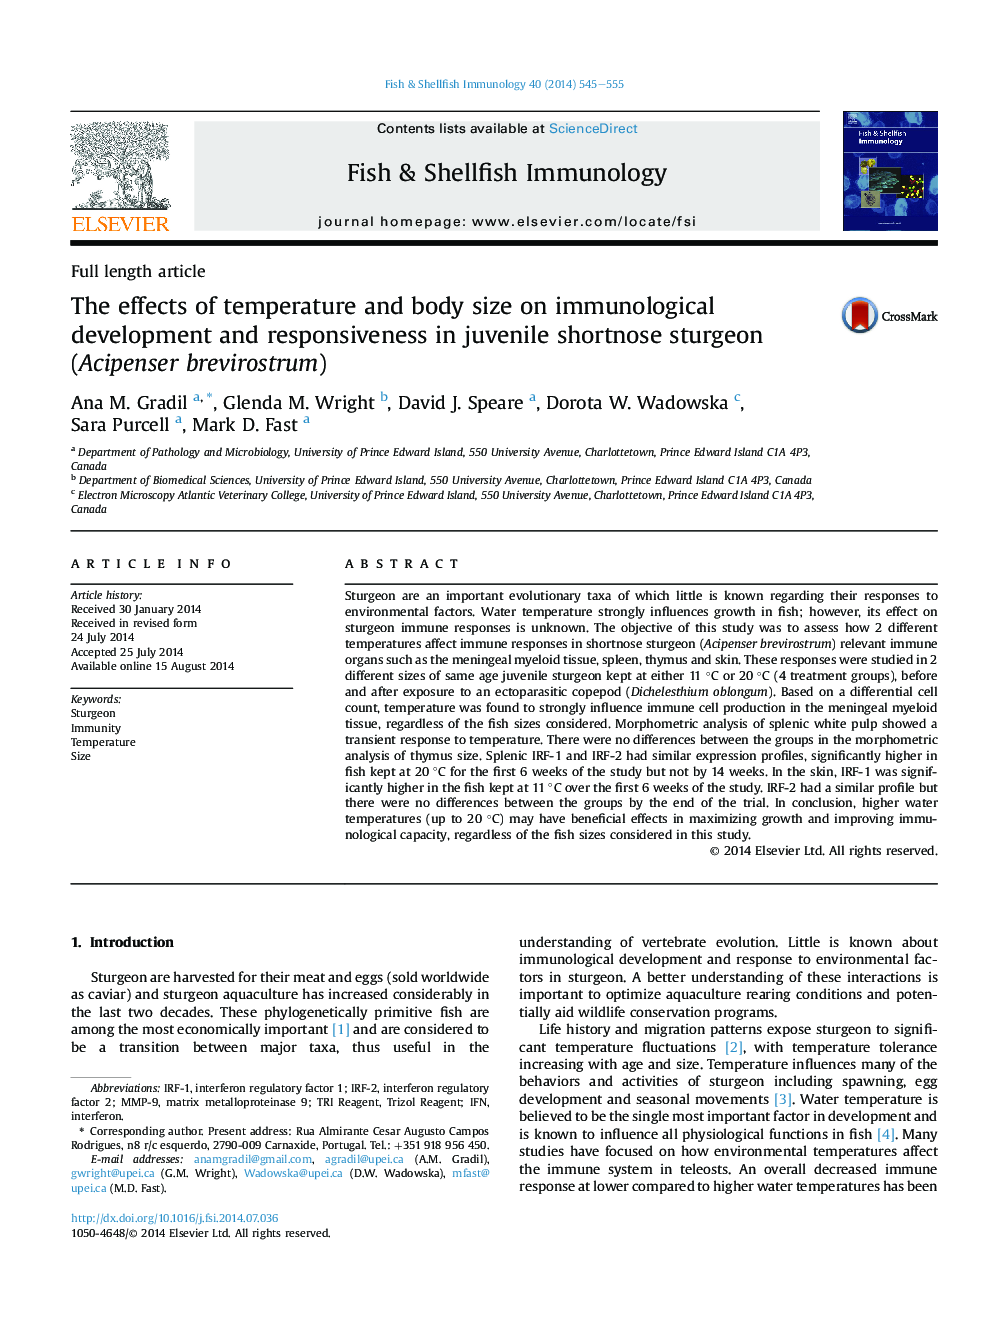 The effects of temperature and body size on immunological development and responsiveness in juvenile shortnose sturgeon (Acipenser brevirostrum)